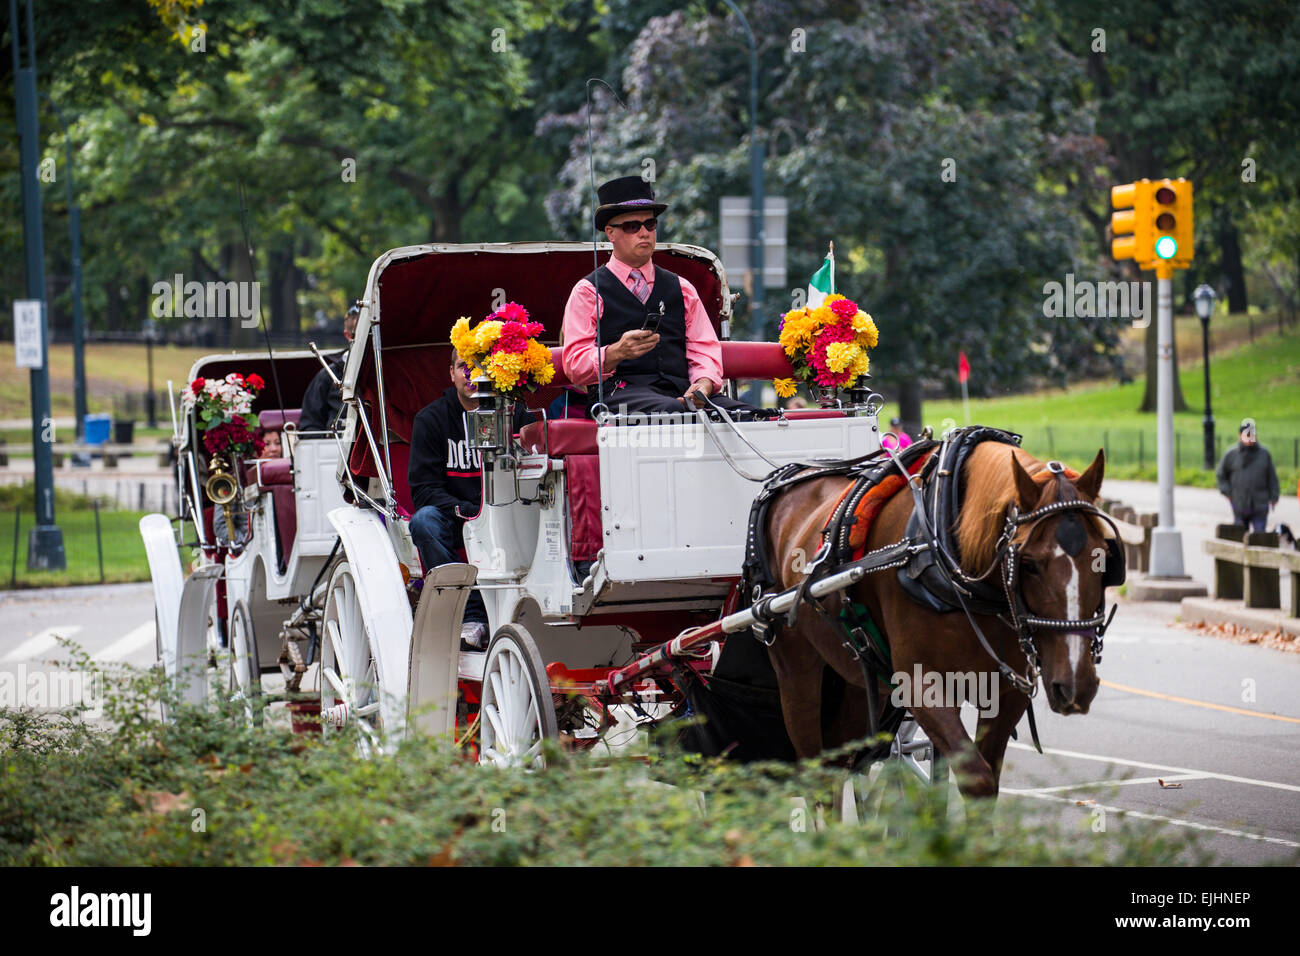 Horse and carriage ride in Central Park, New York, USA Stock Photo